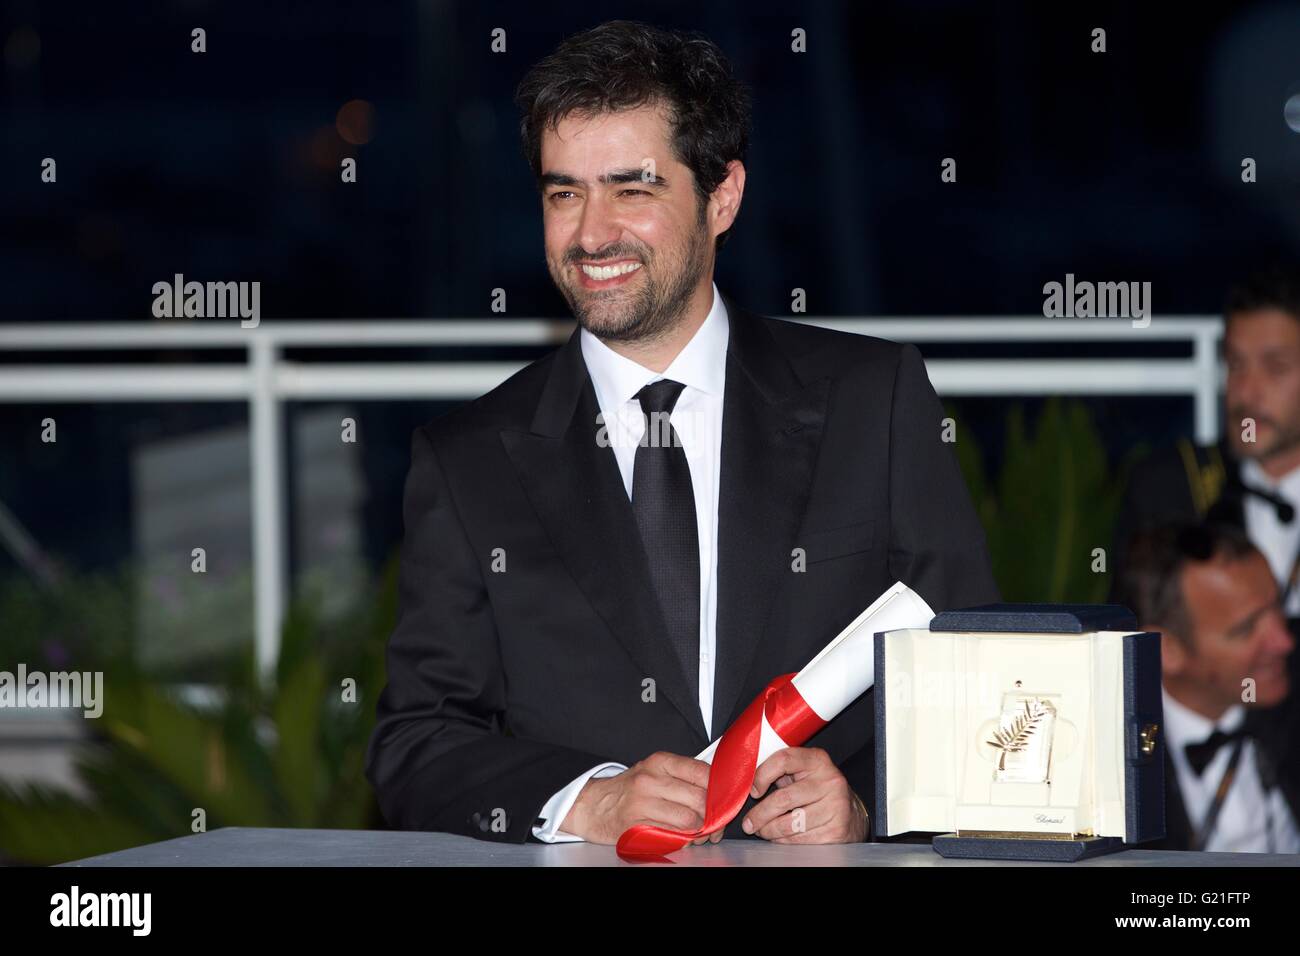 Cannes, France. 22nd May, 2016. Actor Shahab Hosseini, Best Actor Award winner for his role in the film 'Forushande' (The Salesman), poses during a photocall after the closing ceremony of the 69th Cannes Film Festival in Cannes, France, May 22, 2016. Credit:  Jin Yu/Xinhua/Alamy Live News Stock Photo